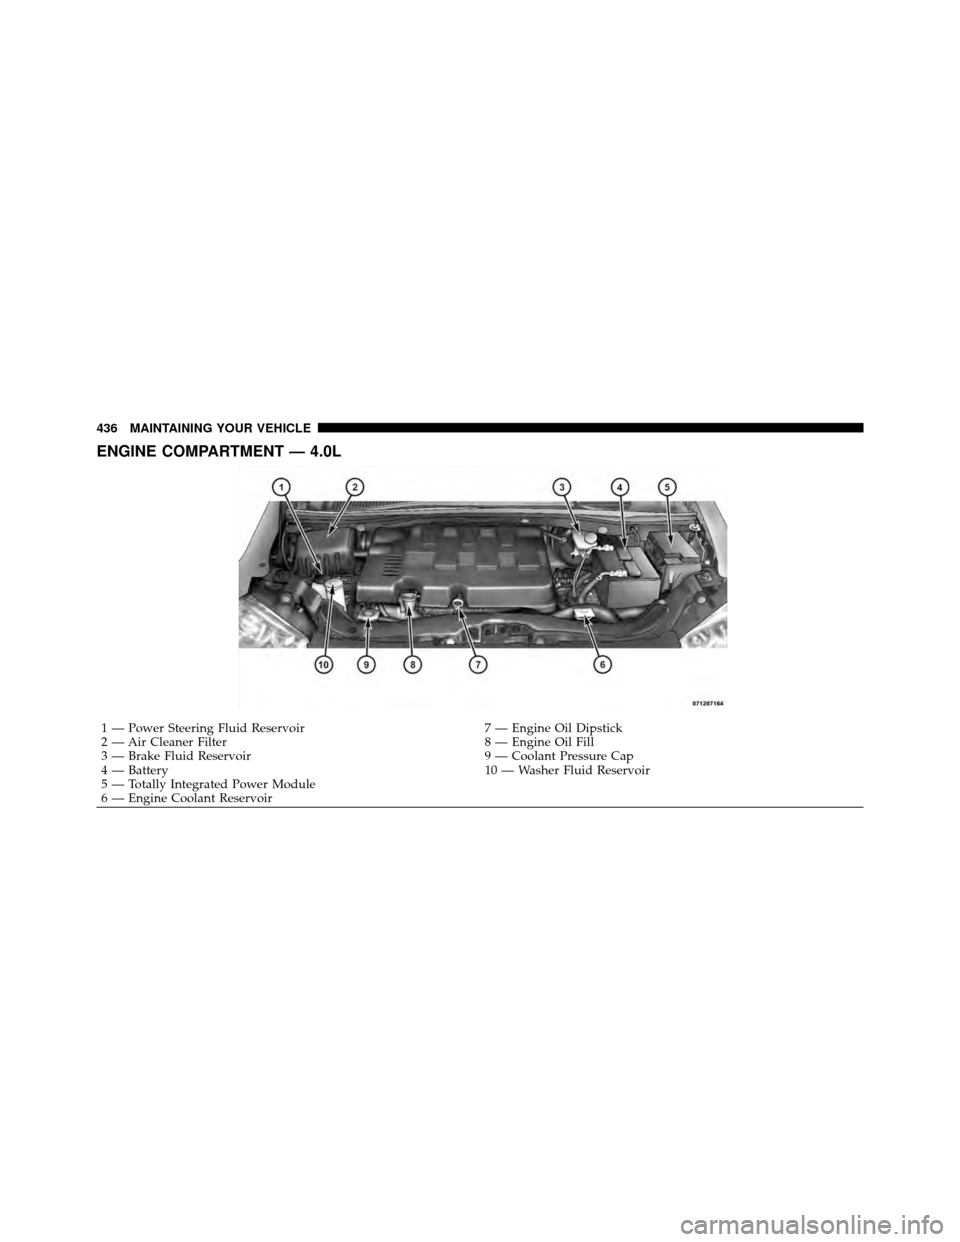 CHRYSLER TOWN AND COUNTRY 2010 5.G Owners Manual ENGINE COMPARTMENT — 4.0L
1 — Power Steering Fluid Reservoir7 — Engine Oil Dipstick
2 — Air Cleaner Filter 8 — Engine Oil Fill
3 — Brake Fluid Reservoir 9 — Coolant Pressure Cap
4 — Ba